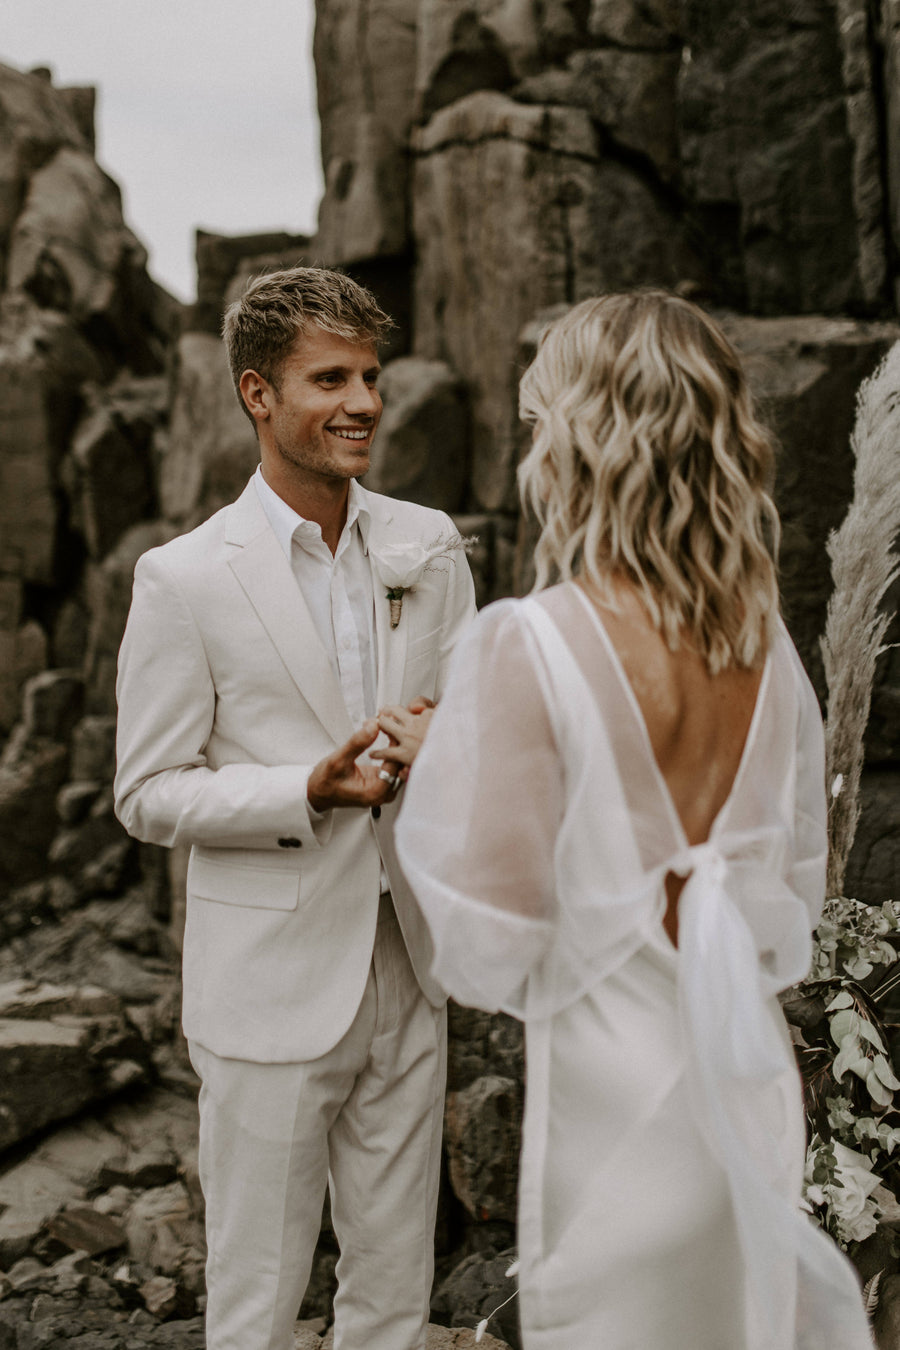 Full Day Elopement Package (10 hours)